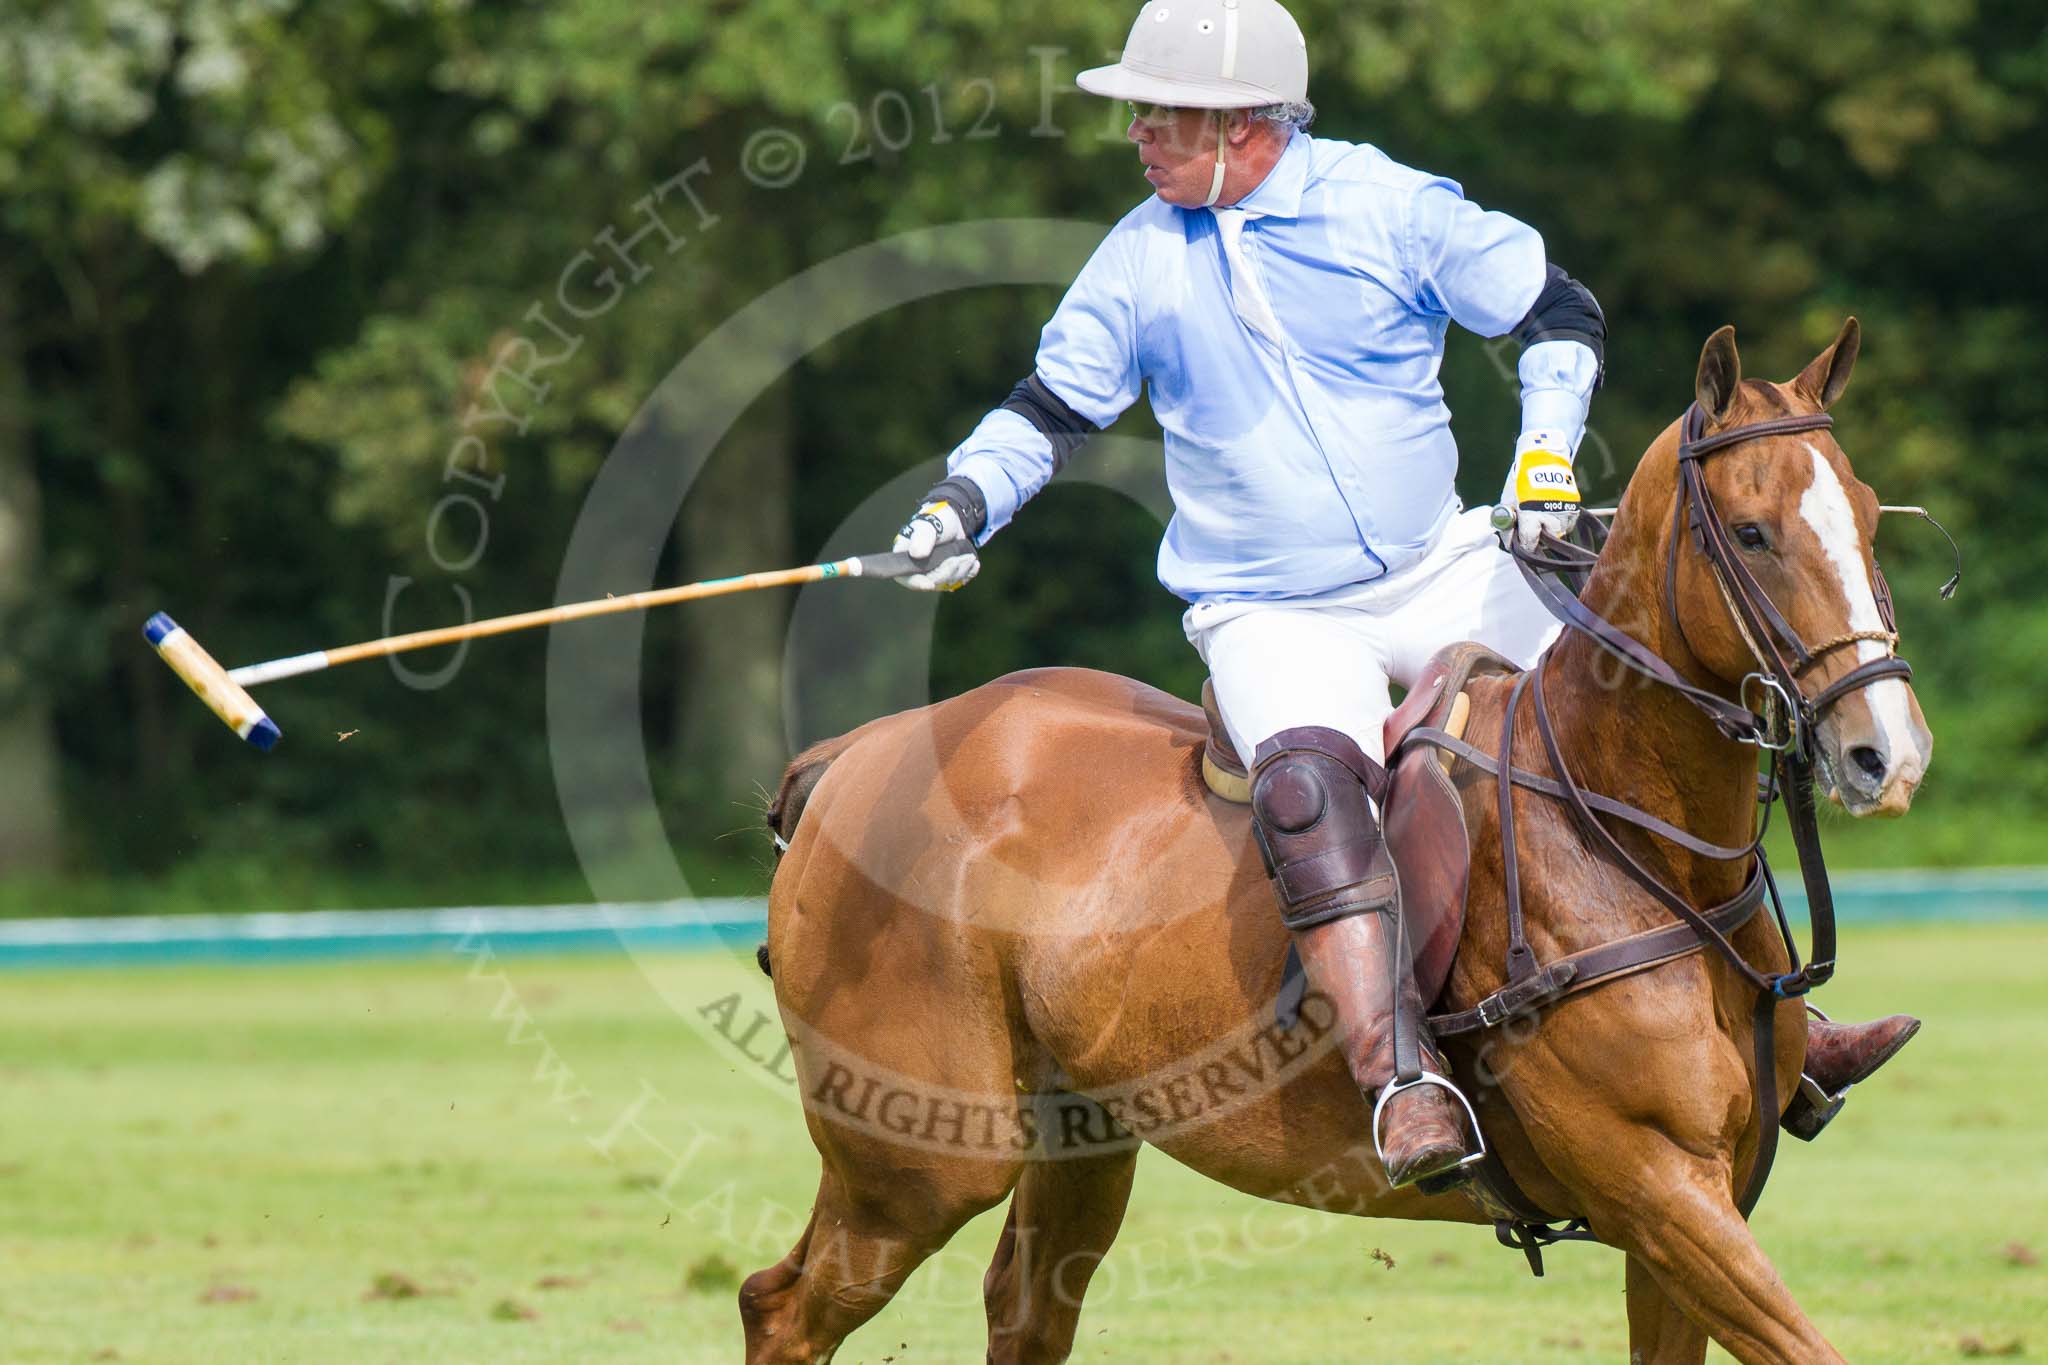 7th Heritage Polo Cup semi-finals: Mariano Darritchon..
Hurtwood Park Polo Club,
Ewhurst Green,
Surrey,
United Kingdom,
on 04 August 2012 at 16:15, image #318